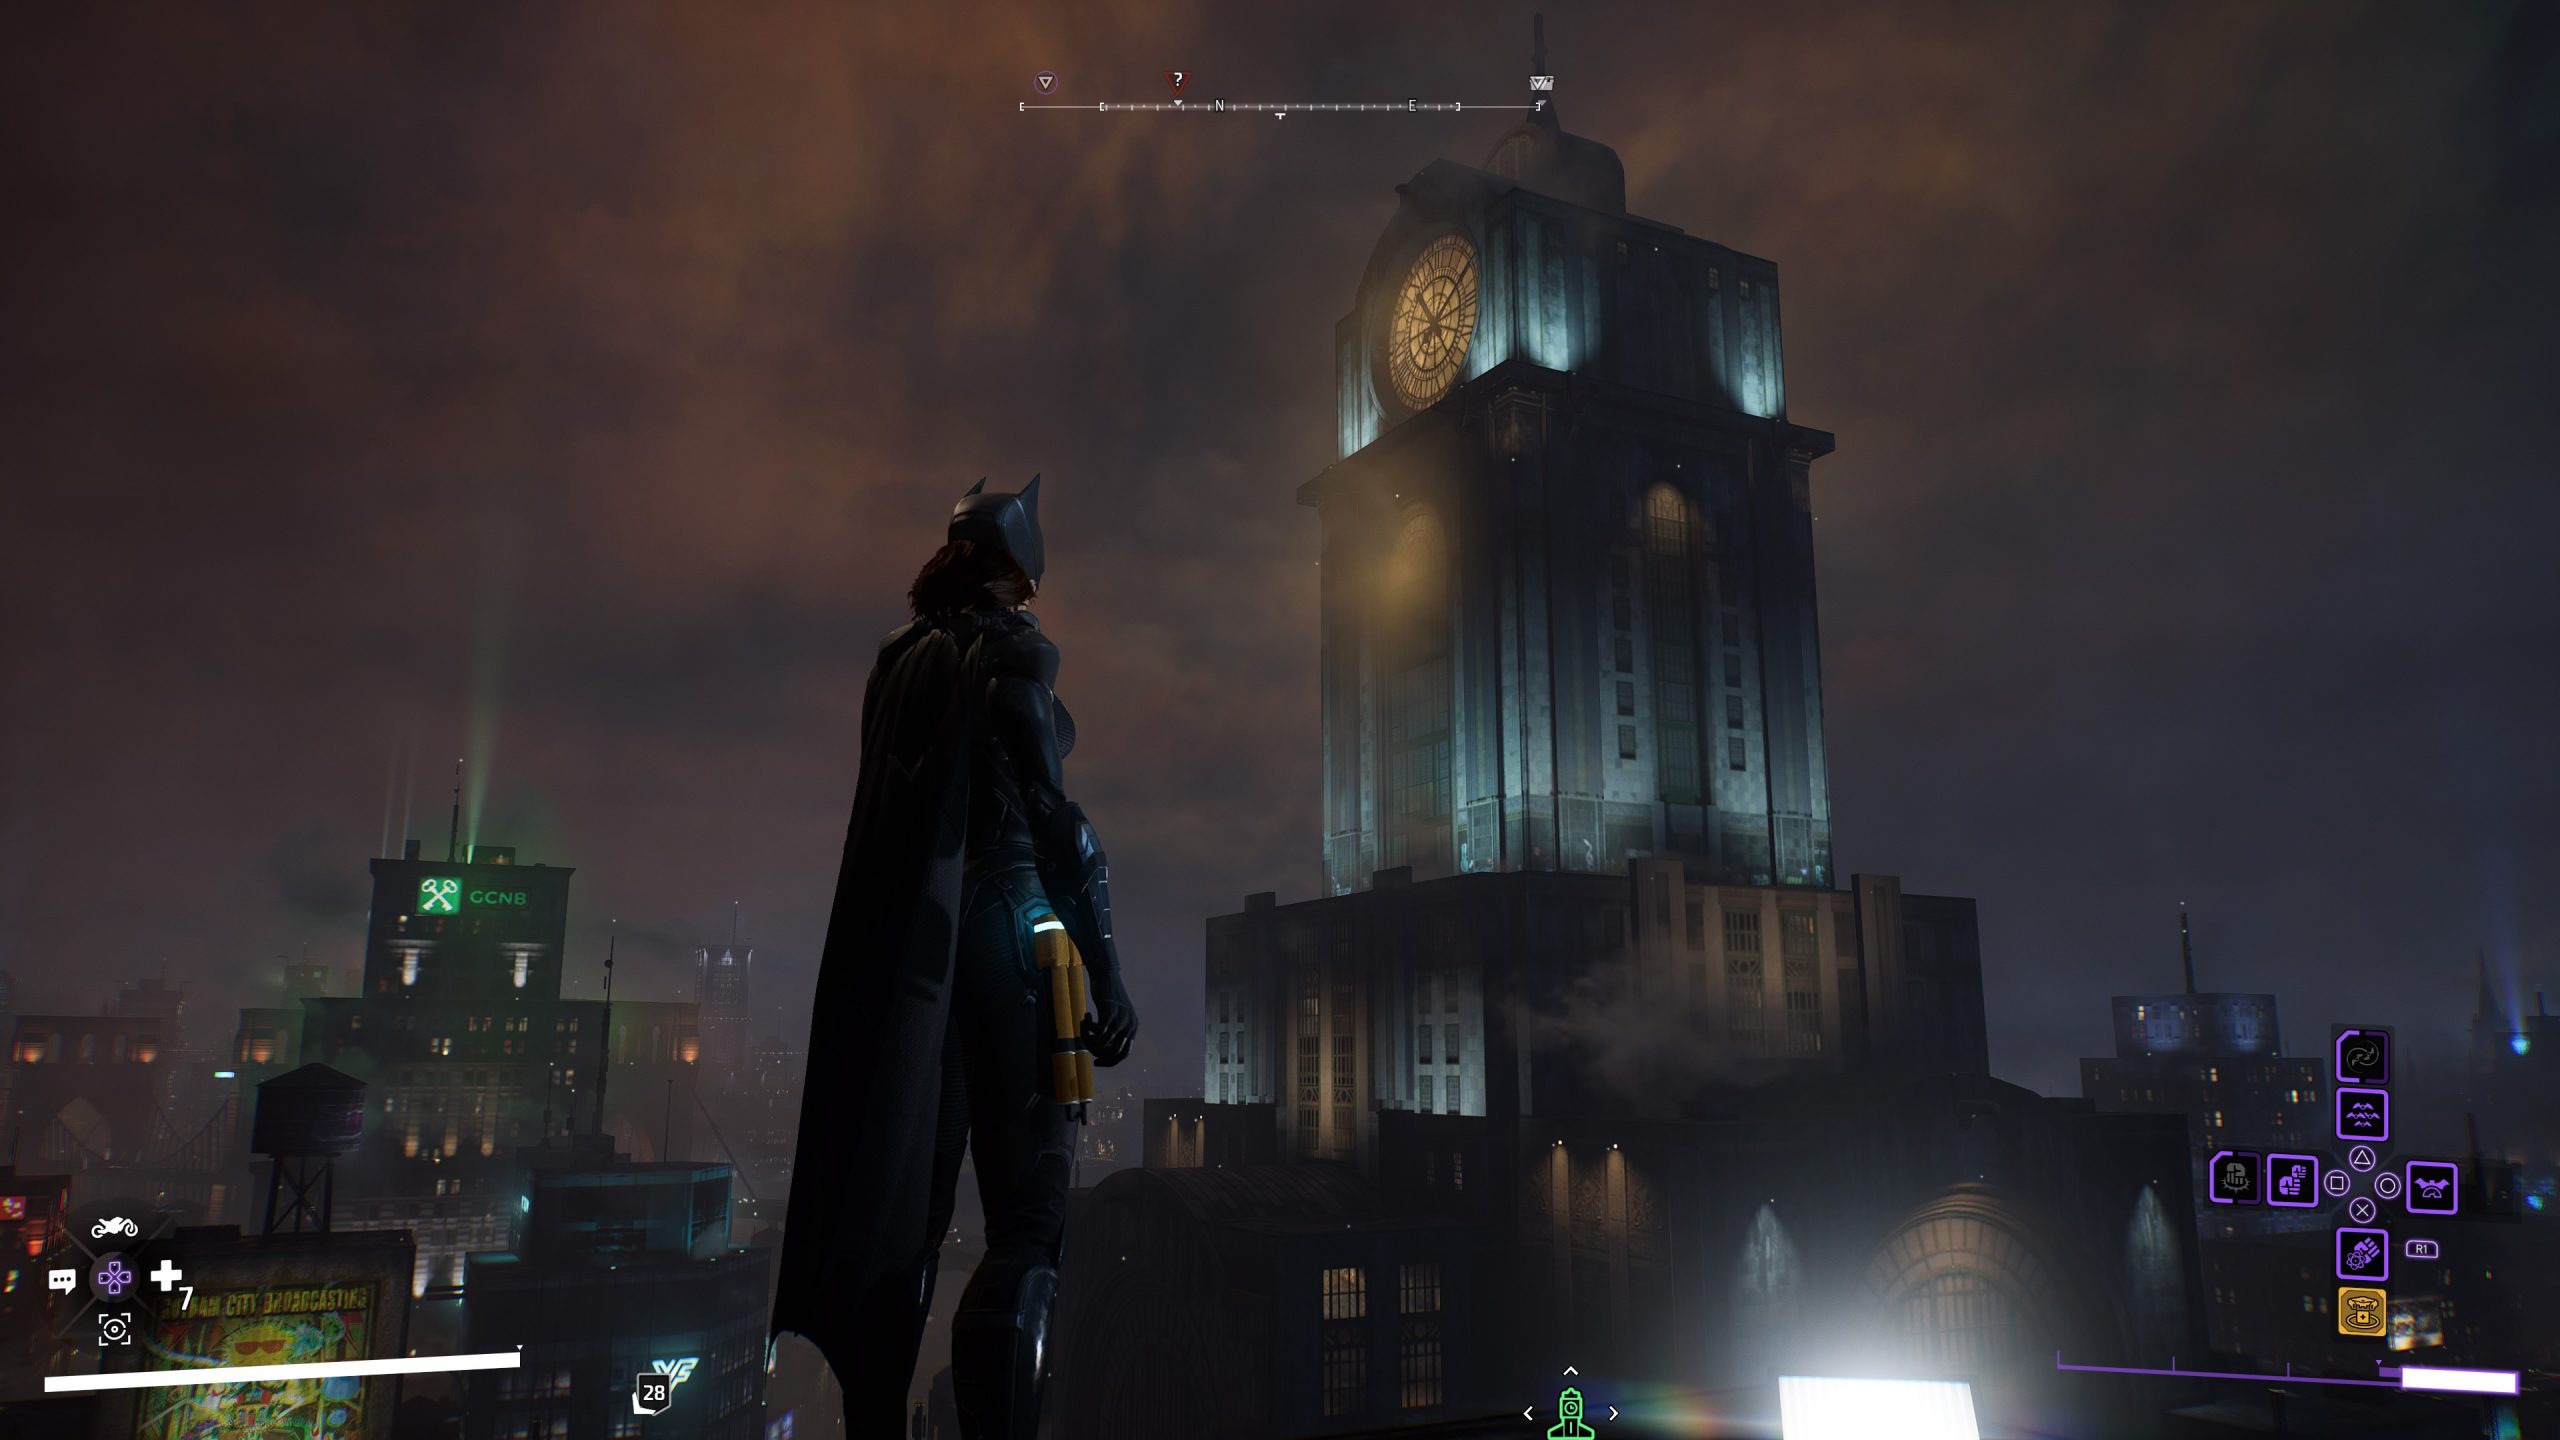 Gotham Knights review – Time to take Gotham City by storm — GAMINGTREND